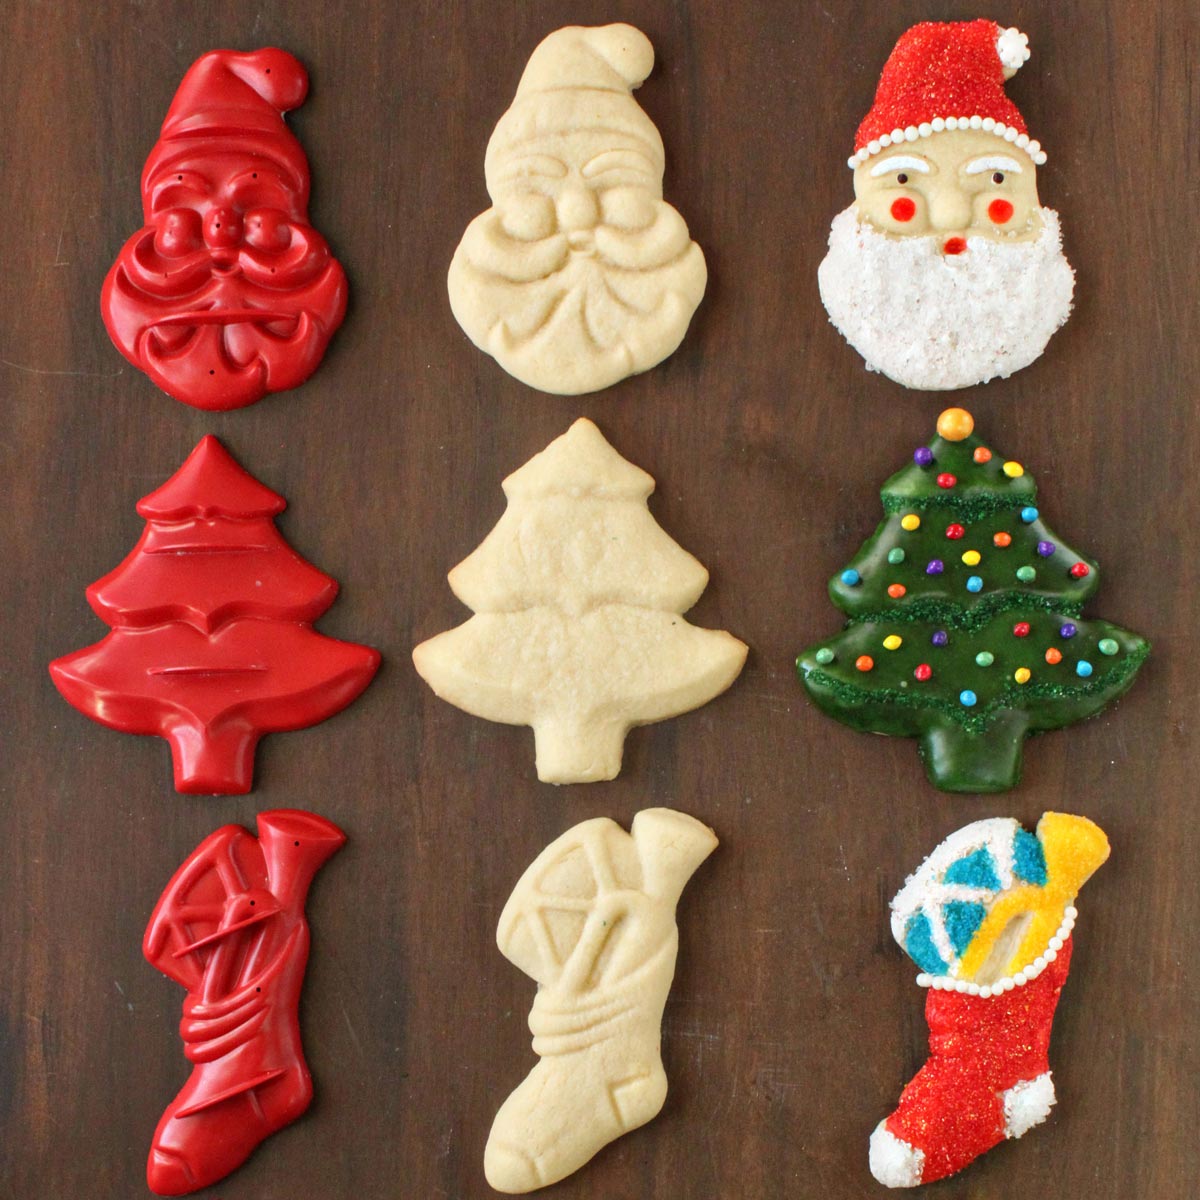 https://www.sugarhero.com/wp-content/uploads/2014/12/vintage-christmas-card-cakes-no-spread-sugar-cookie-featured-image.jpg